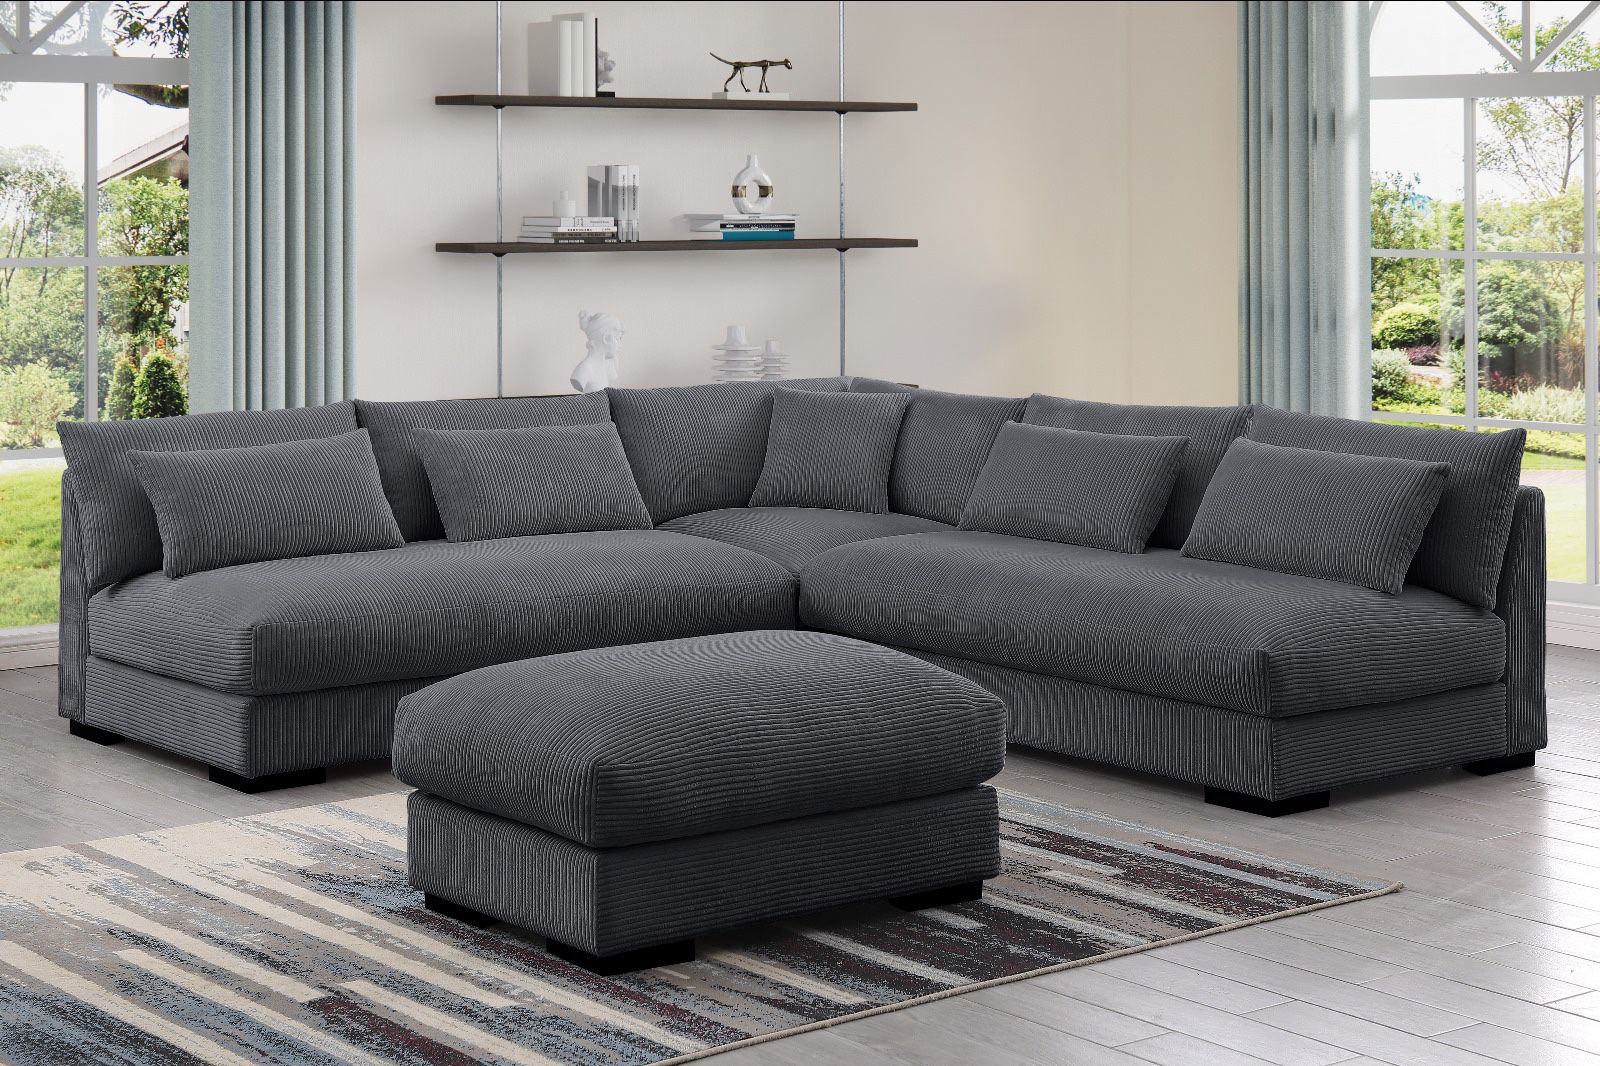 New! Sectional Sofa, Sectionals, Sofa, Couch, Large Sectional, Sofa, Grey Sofa, Beige Sectional, Corduroy Couch, Sectionals 